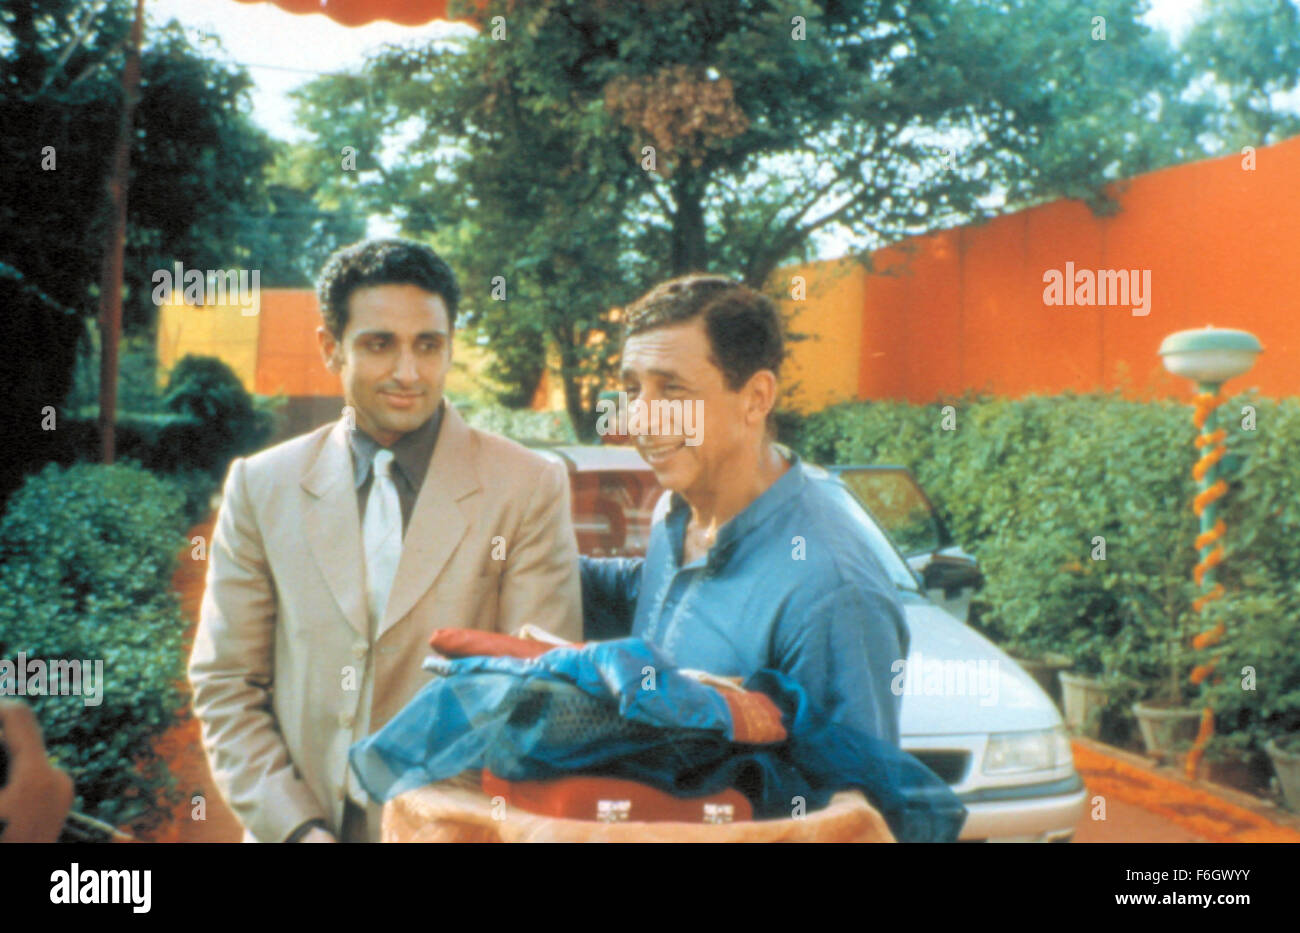 Aug 30, 2001; New Delhi, INDIA; PARVIN DABAS and NASEERUDDIN SHAH star as Hemant Rai and Lalit Verma in the romantic drama/comedy 'Monsoon Wedding' directed by Mira Nair. Stock Photo